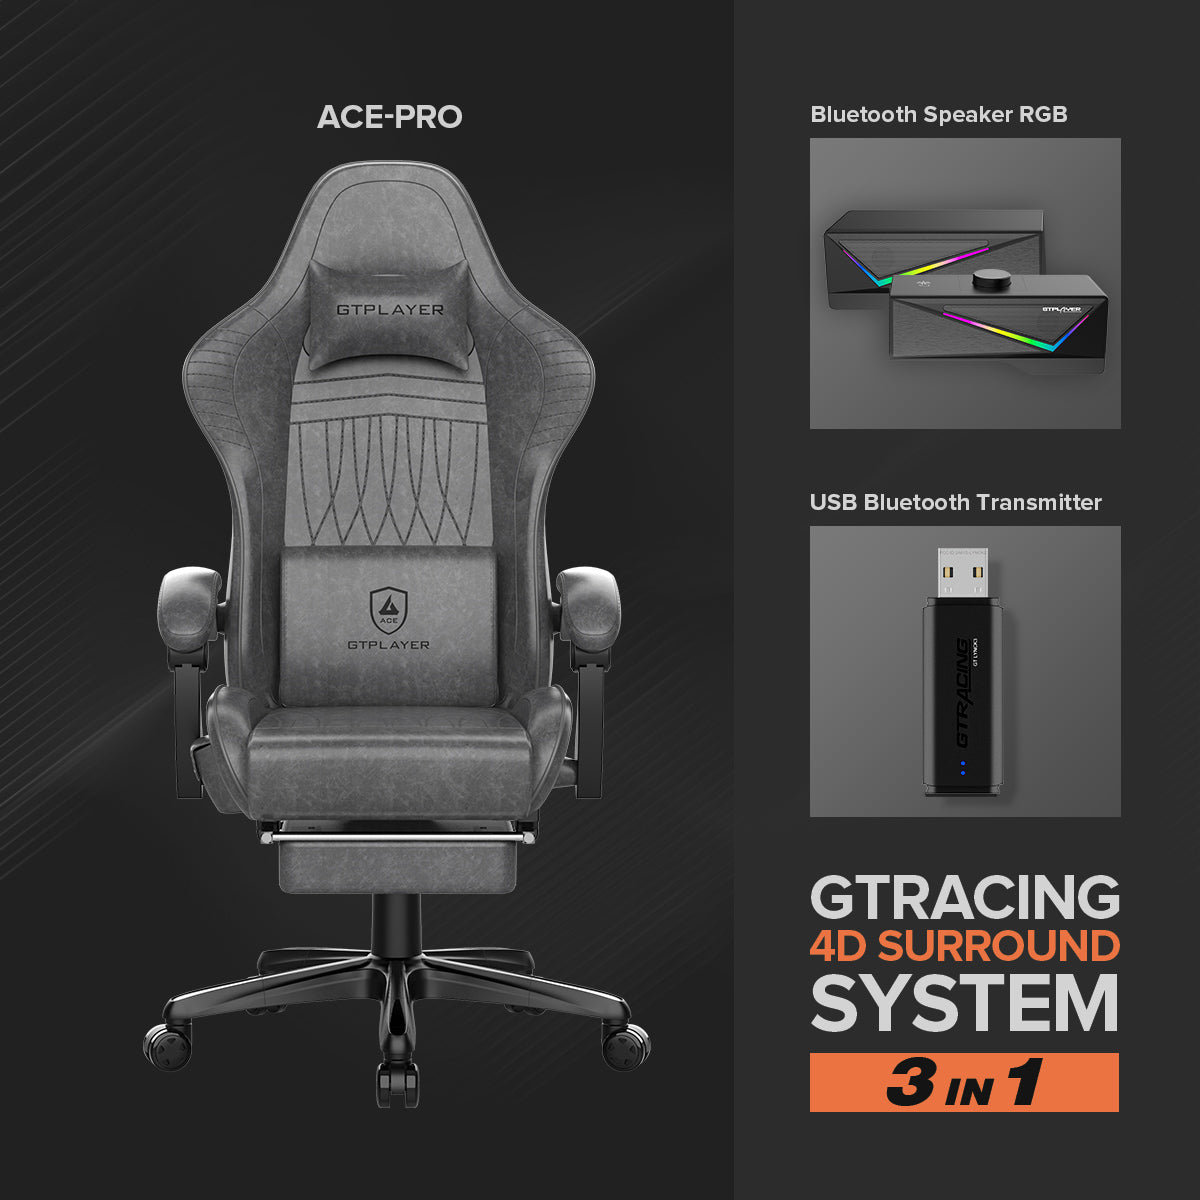 GTRACING 4D Surround System (Ace-Pro, Bluetooth Speaker, and USB transmitter 3 in 1) - GTRACING